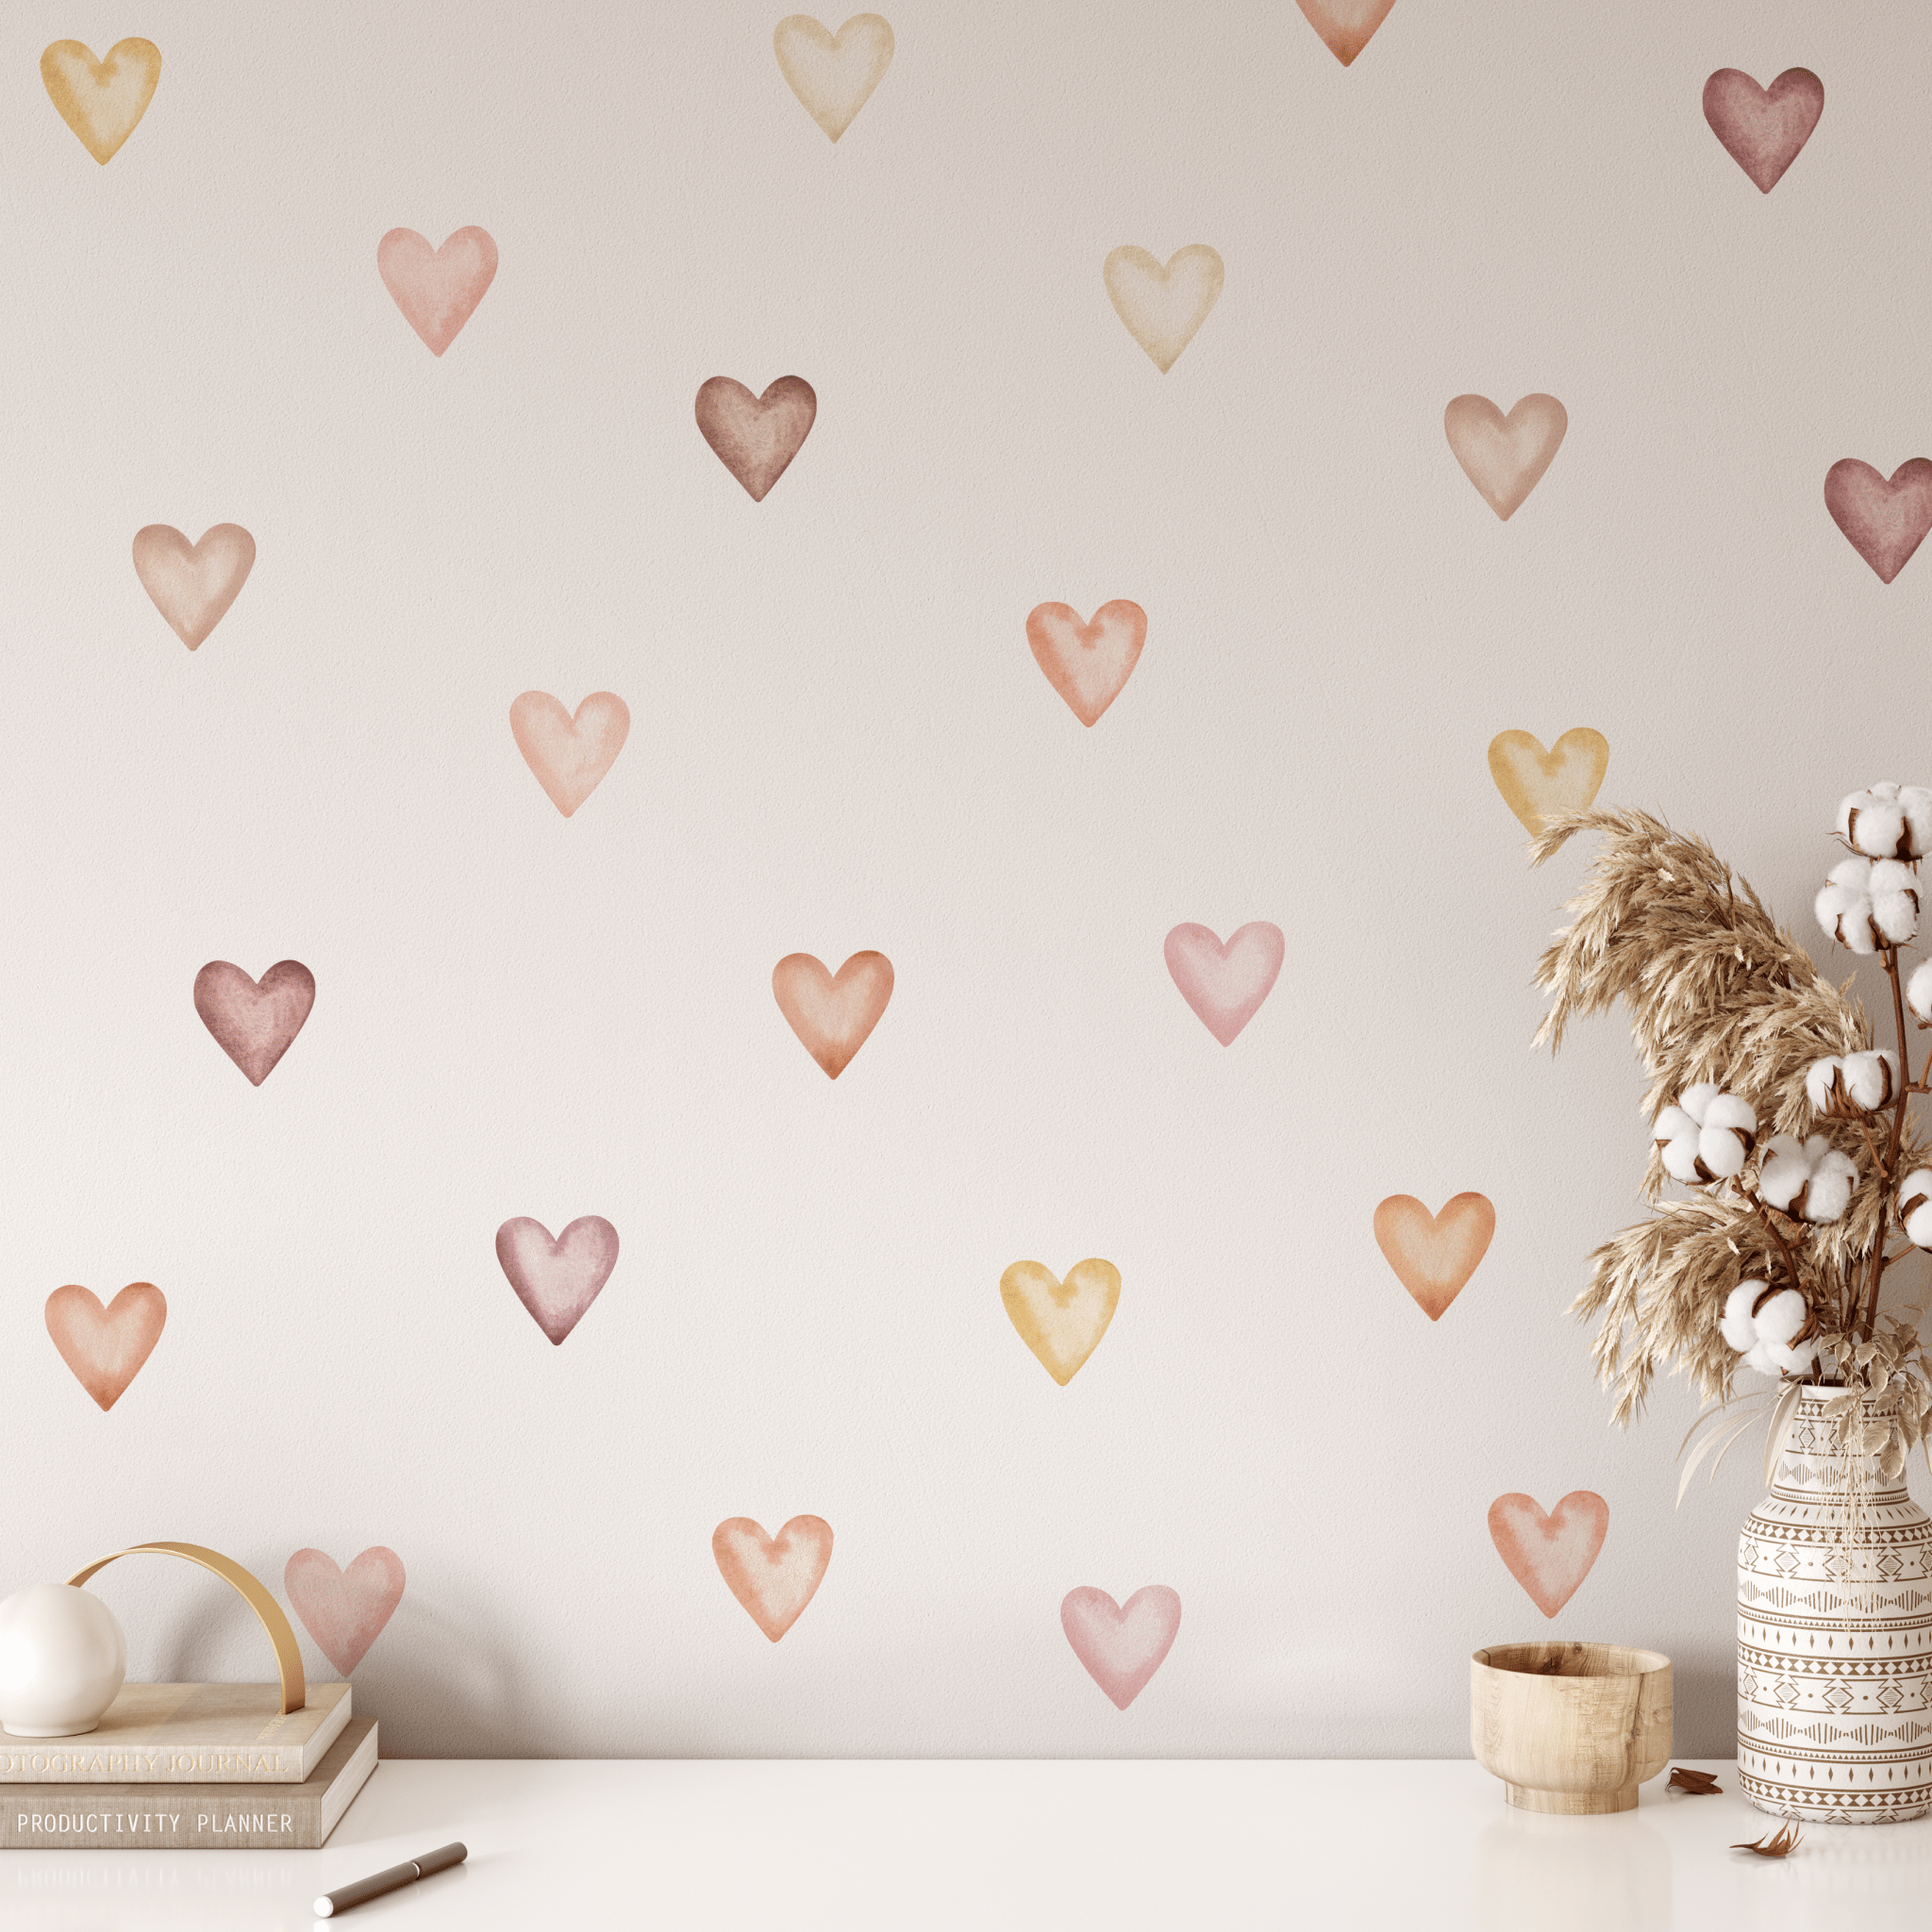 Boho colored removable wall stickers, heart wall decals